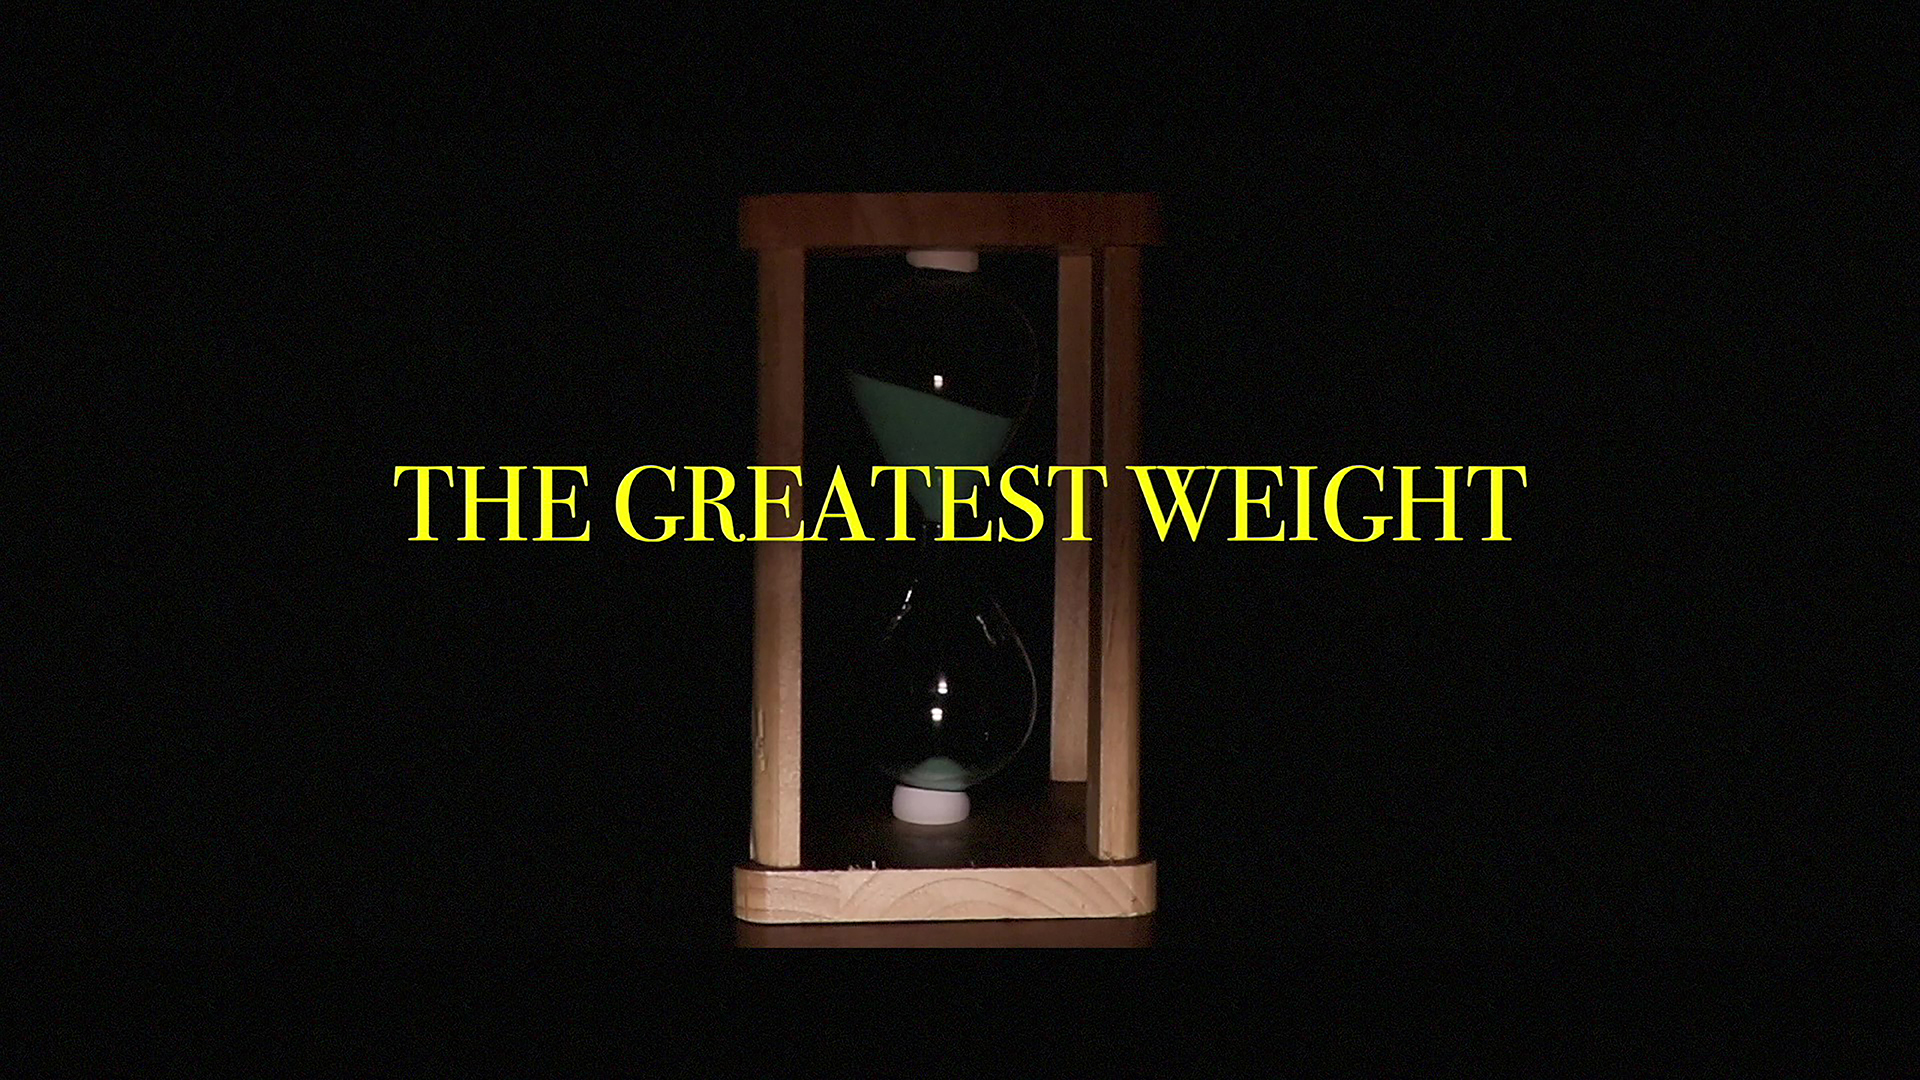 A still from a film showing an hour glass with the title of the work "The Greatest Weight" overlayed in yellow.